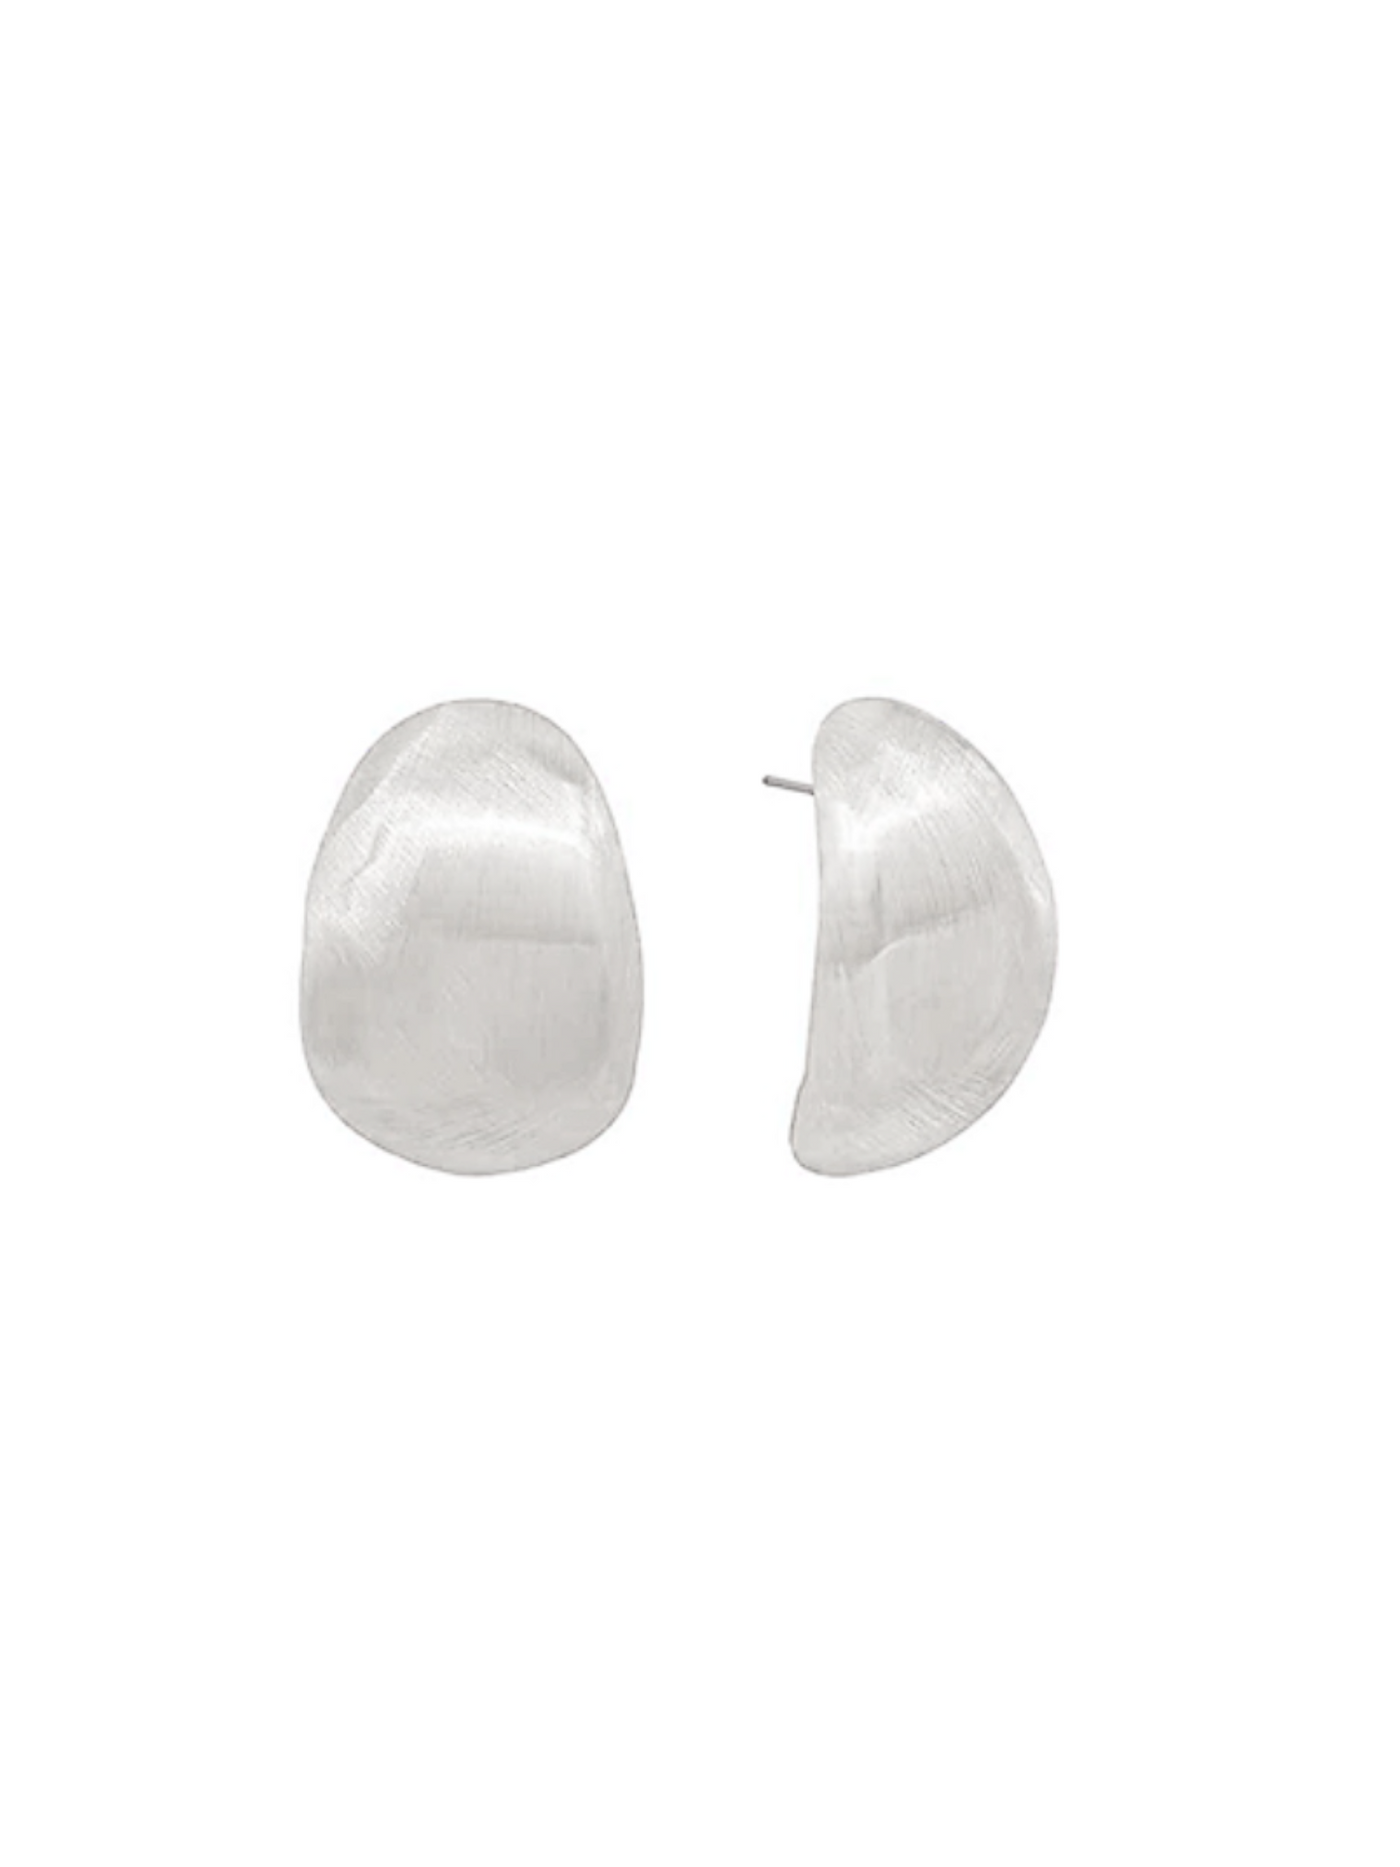 Chunky Round Satin Earrings in brushed silver on white background.